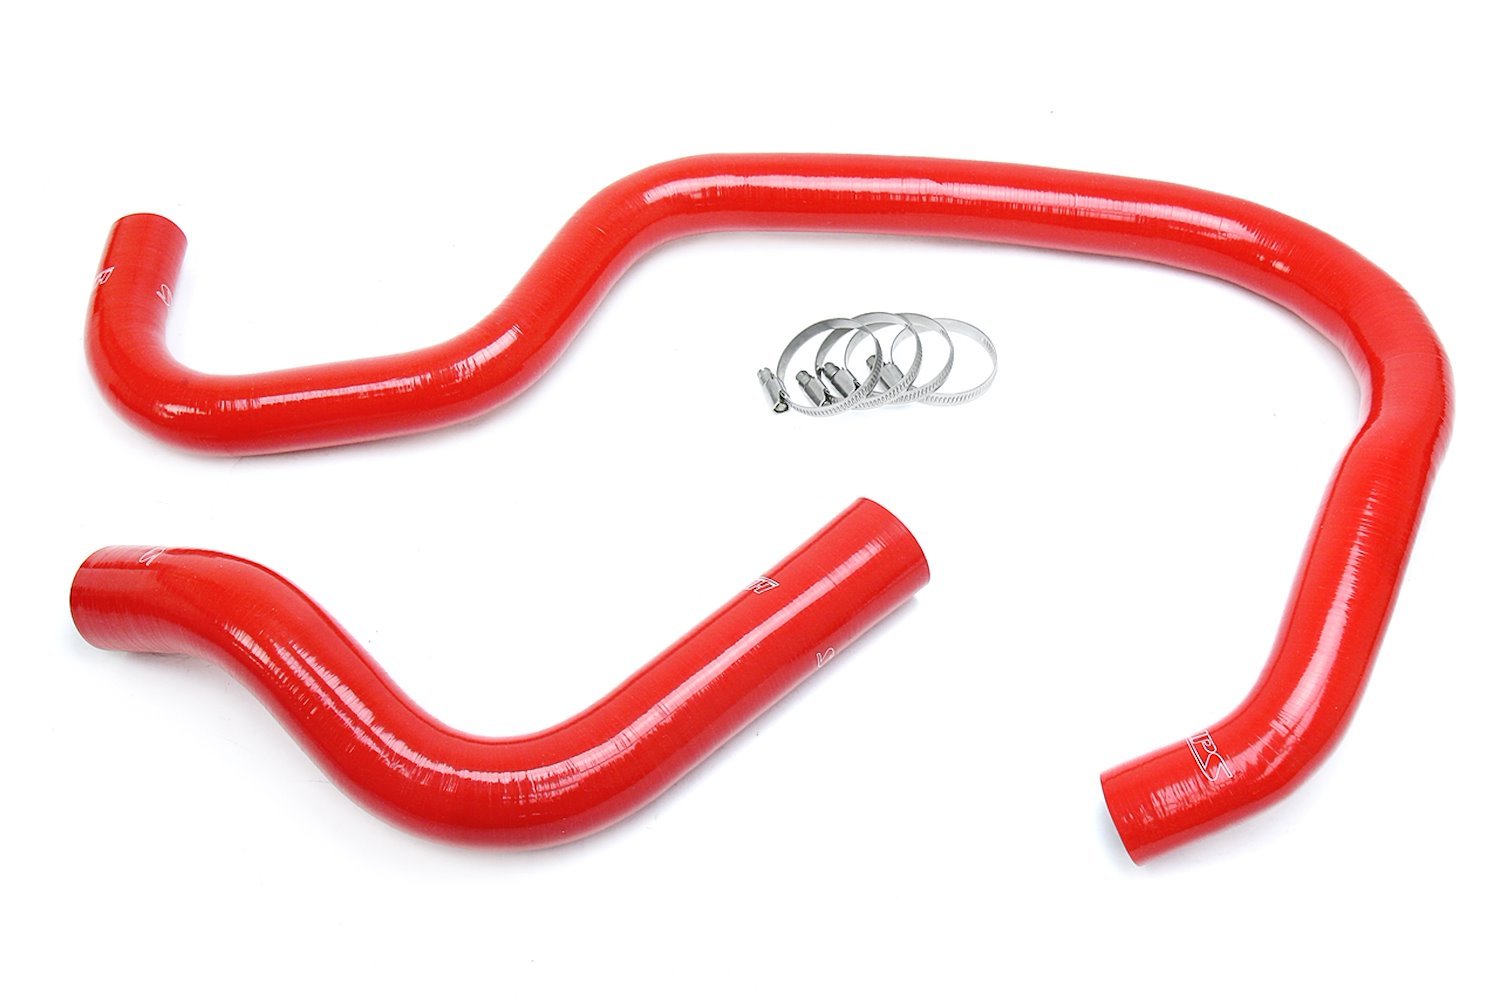 57-1686R-RED Radiator Hose Kit, High-Temp 3-Ply Reinforced Silicone, Replace OEM Rubber Radiator Coolant Hoses